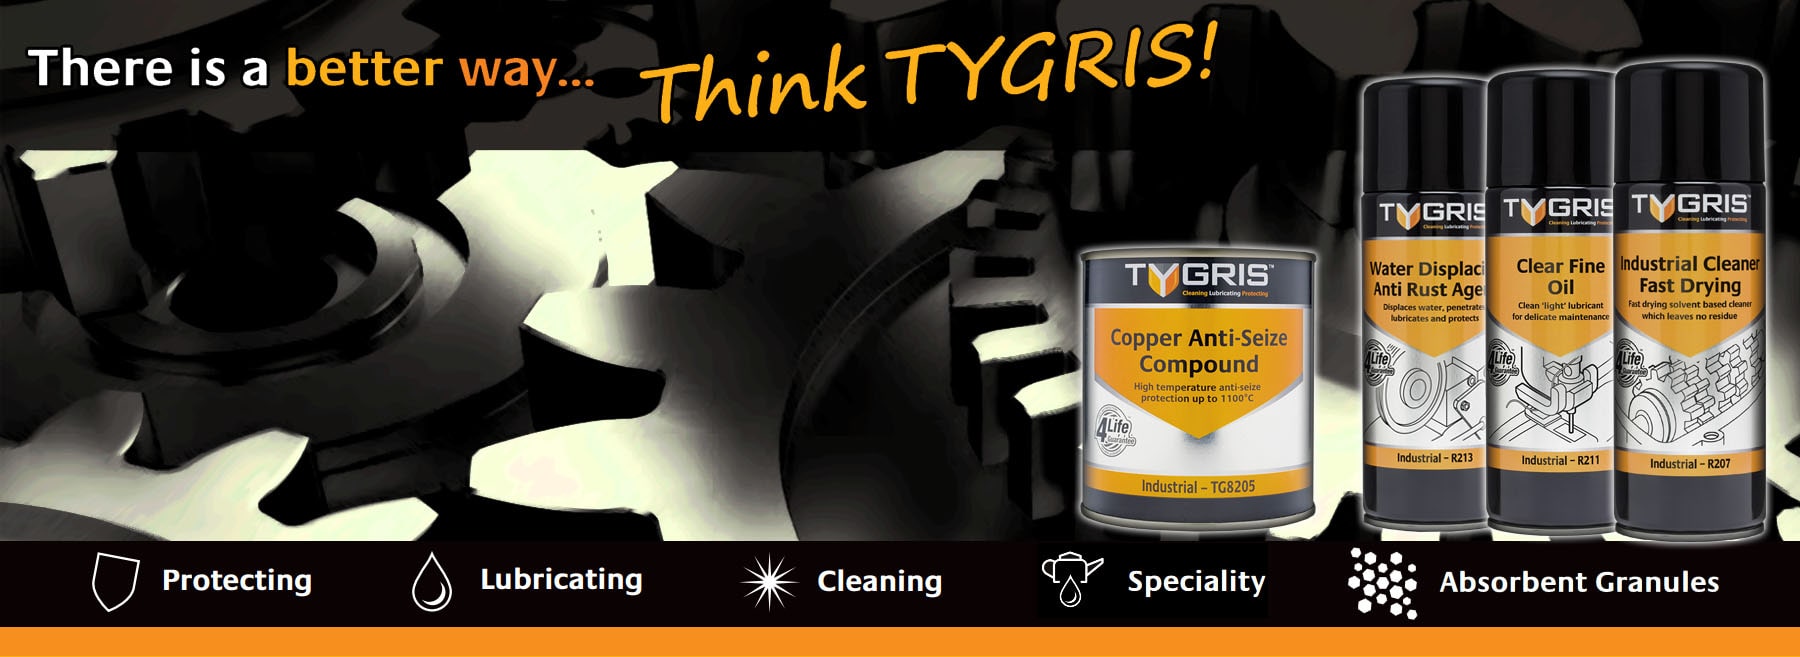 Tygris - Protecting, Lubricating, Cleaning